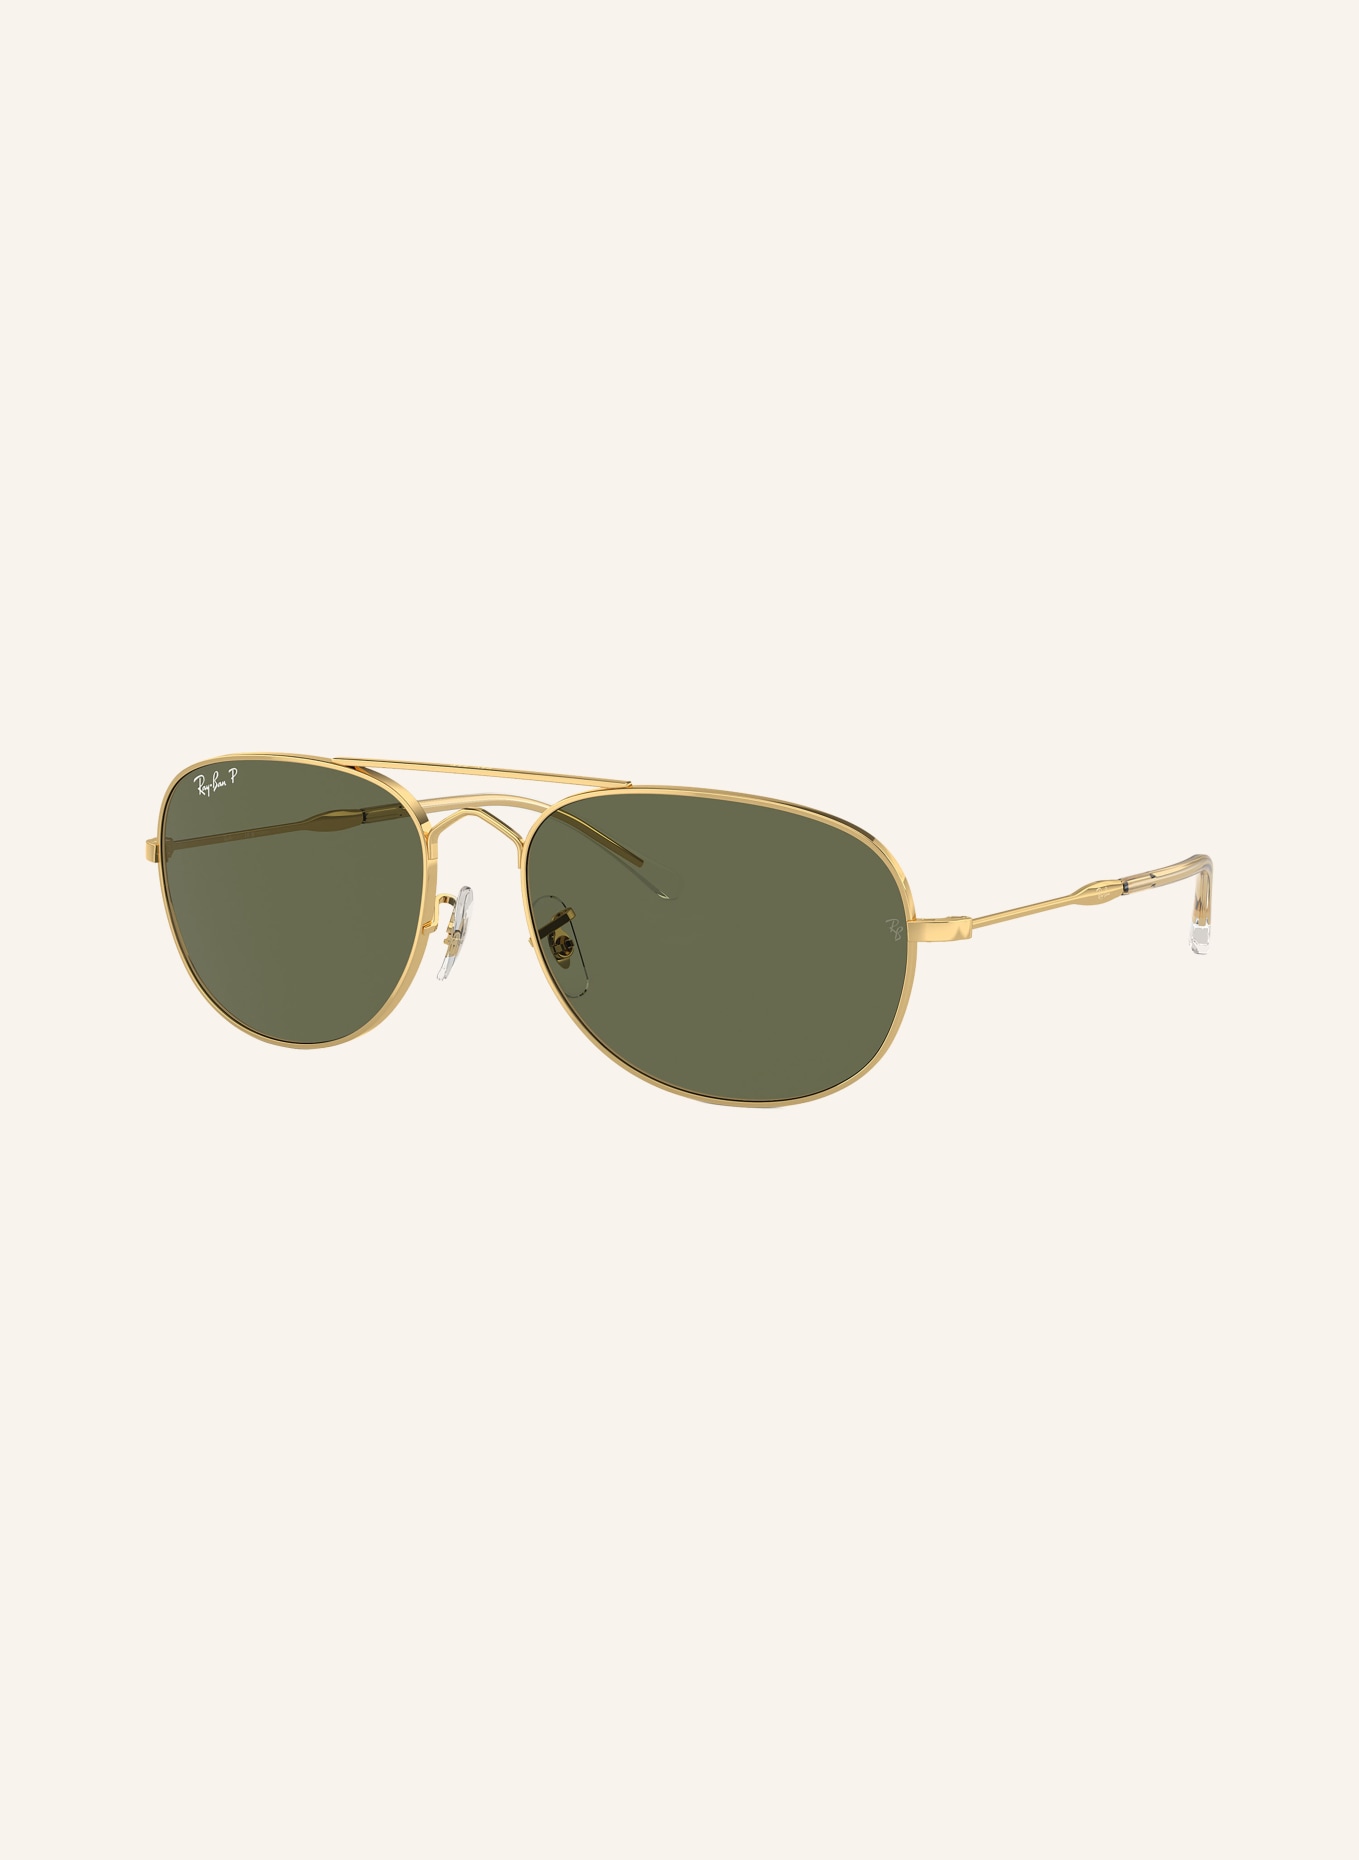 Ray-Ban Sunglasses RB3735, Color: 001/58 - GOLD/DARK GREEN POLARIZED (Image 1)